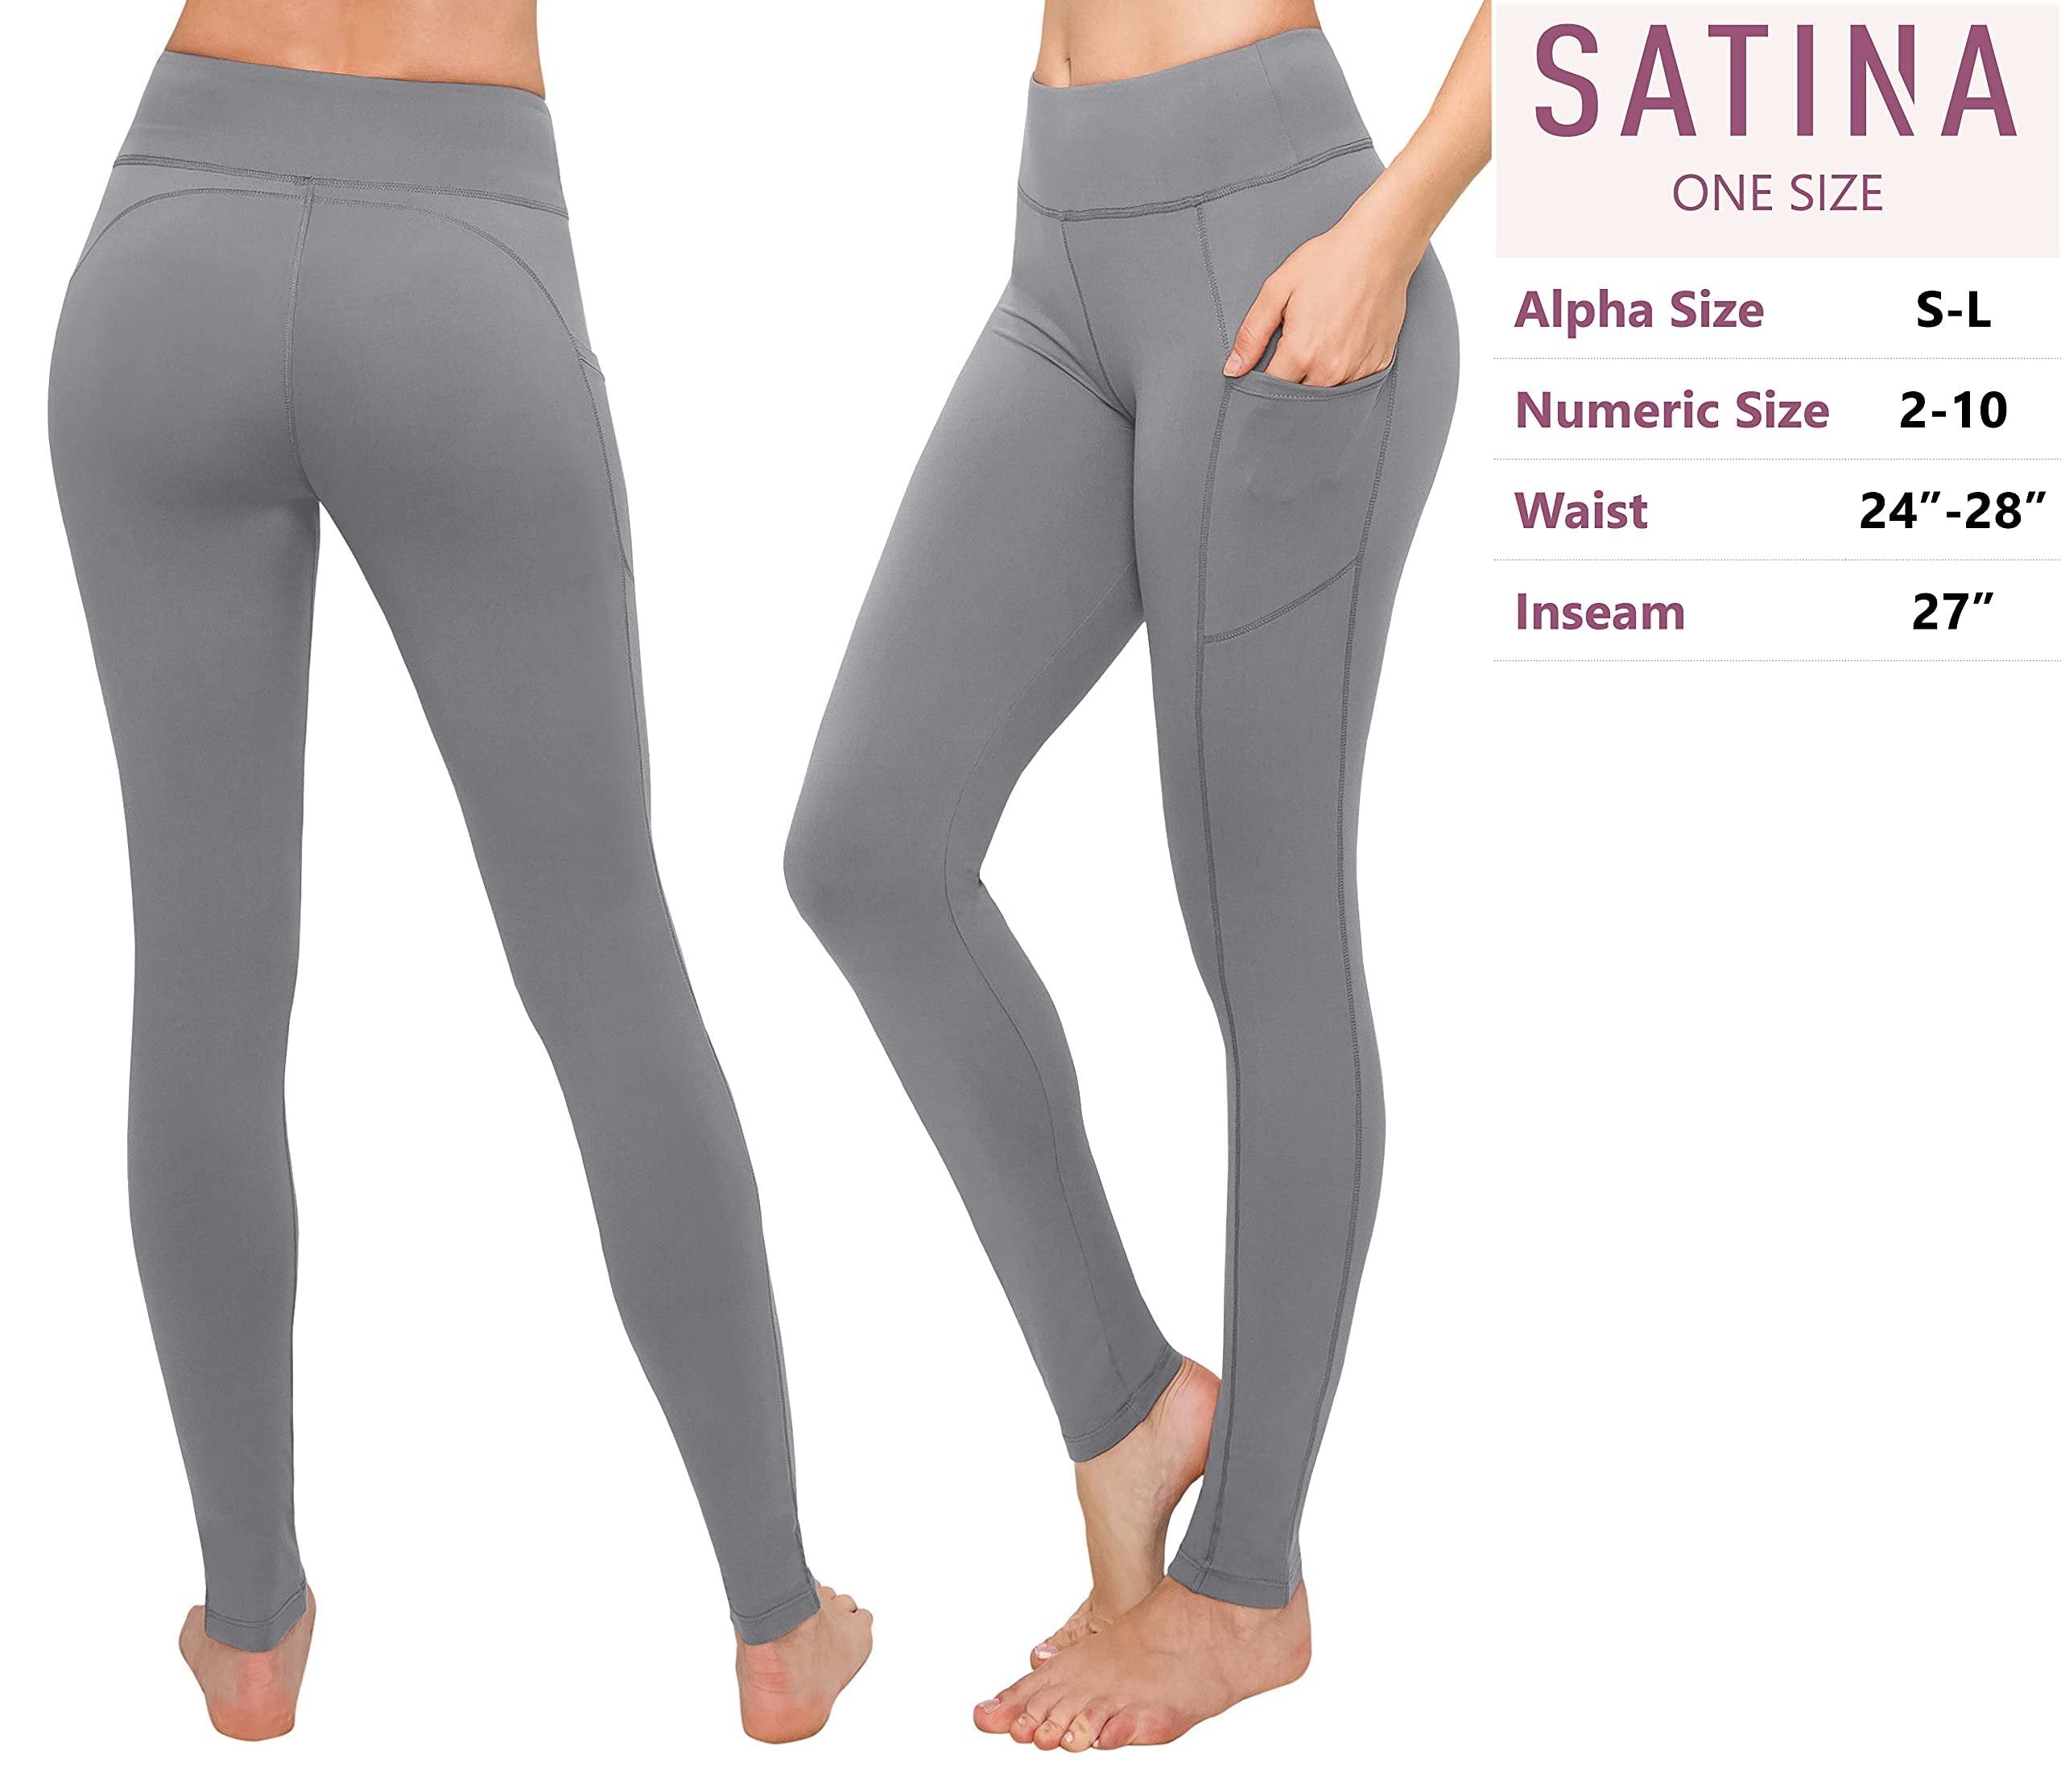 SATINA High Waisted Leggings with Pockets for Women - Workout Leggings for Regular & Plus Size Women - Gray Leggings Women - Yoga Leggings for Women |3 Inch Waistband (One Size, Gray)